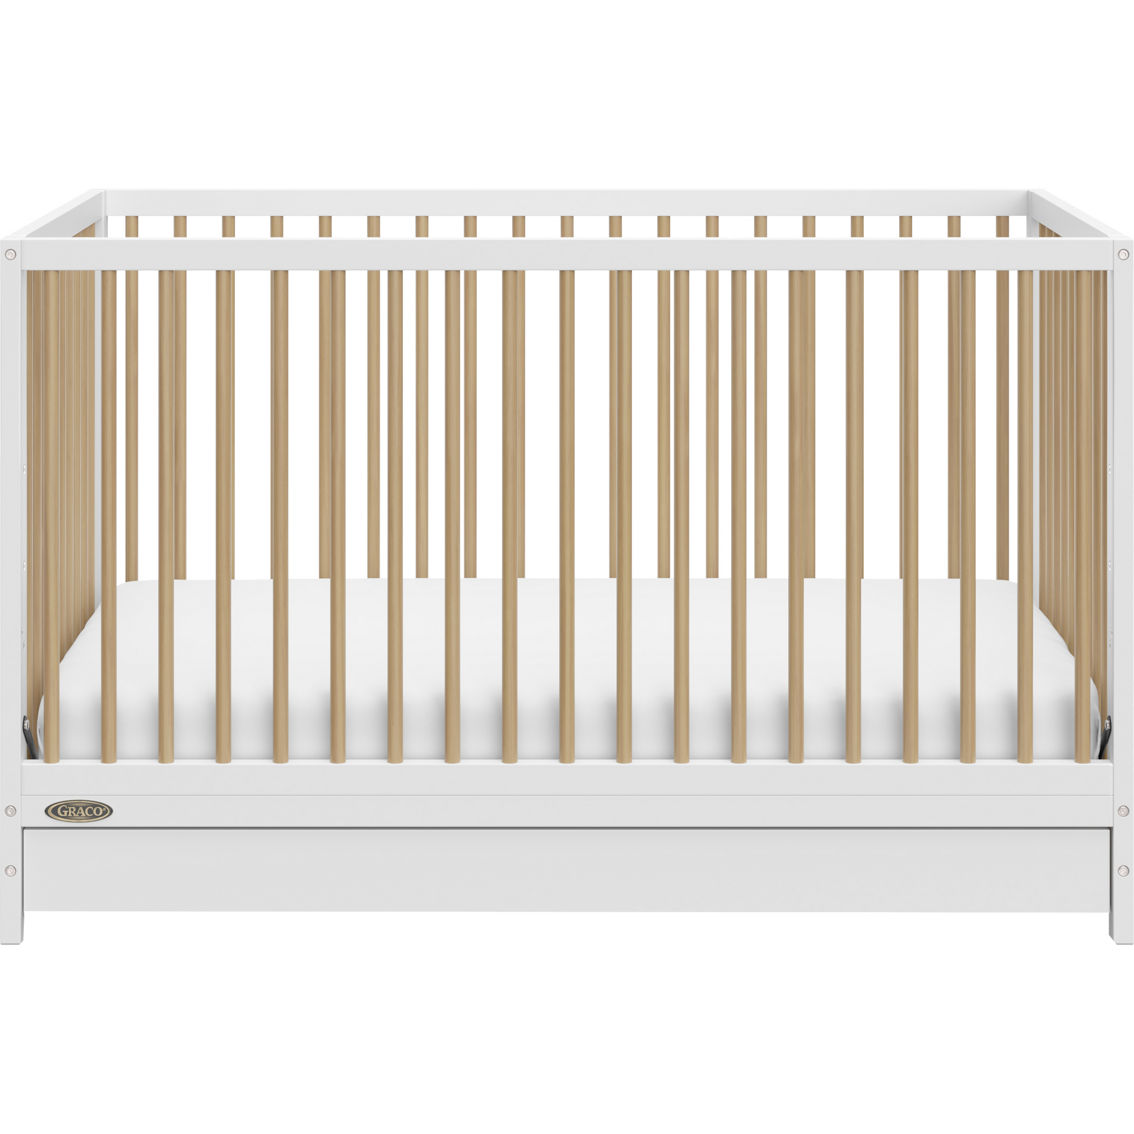 Graco Teddi 5-in-1 Convertible Crib with Drawer - Image 2 of 10